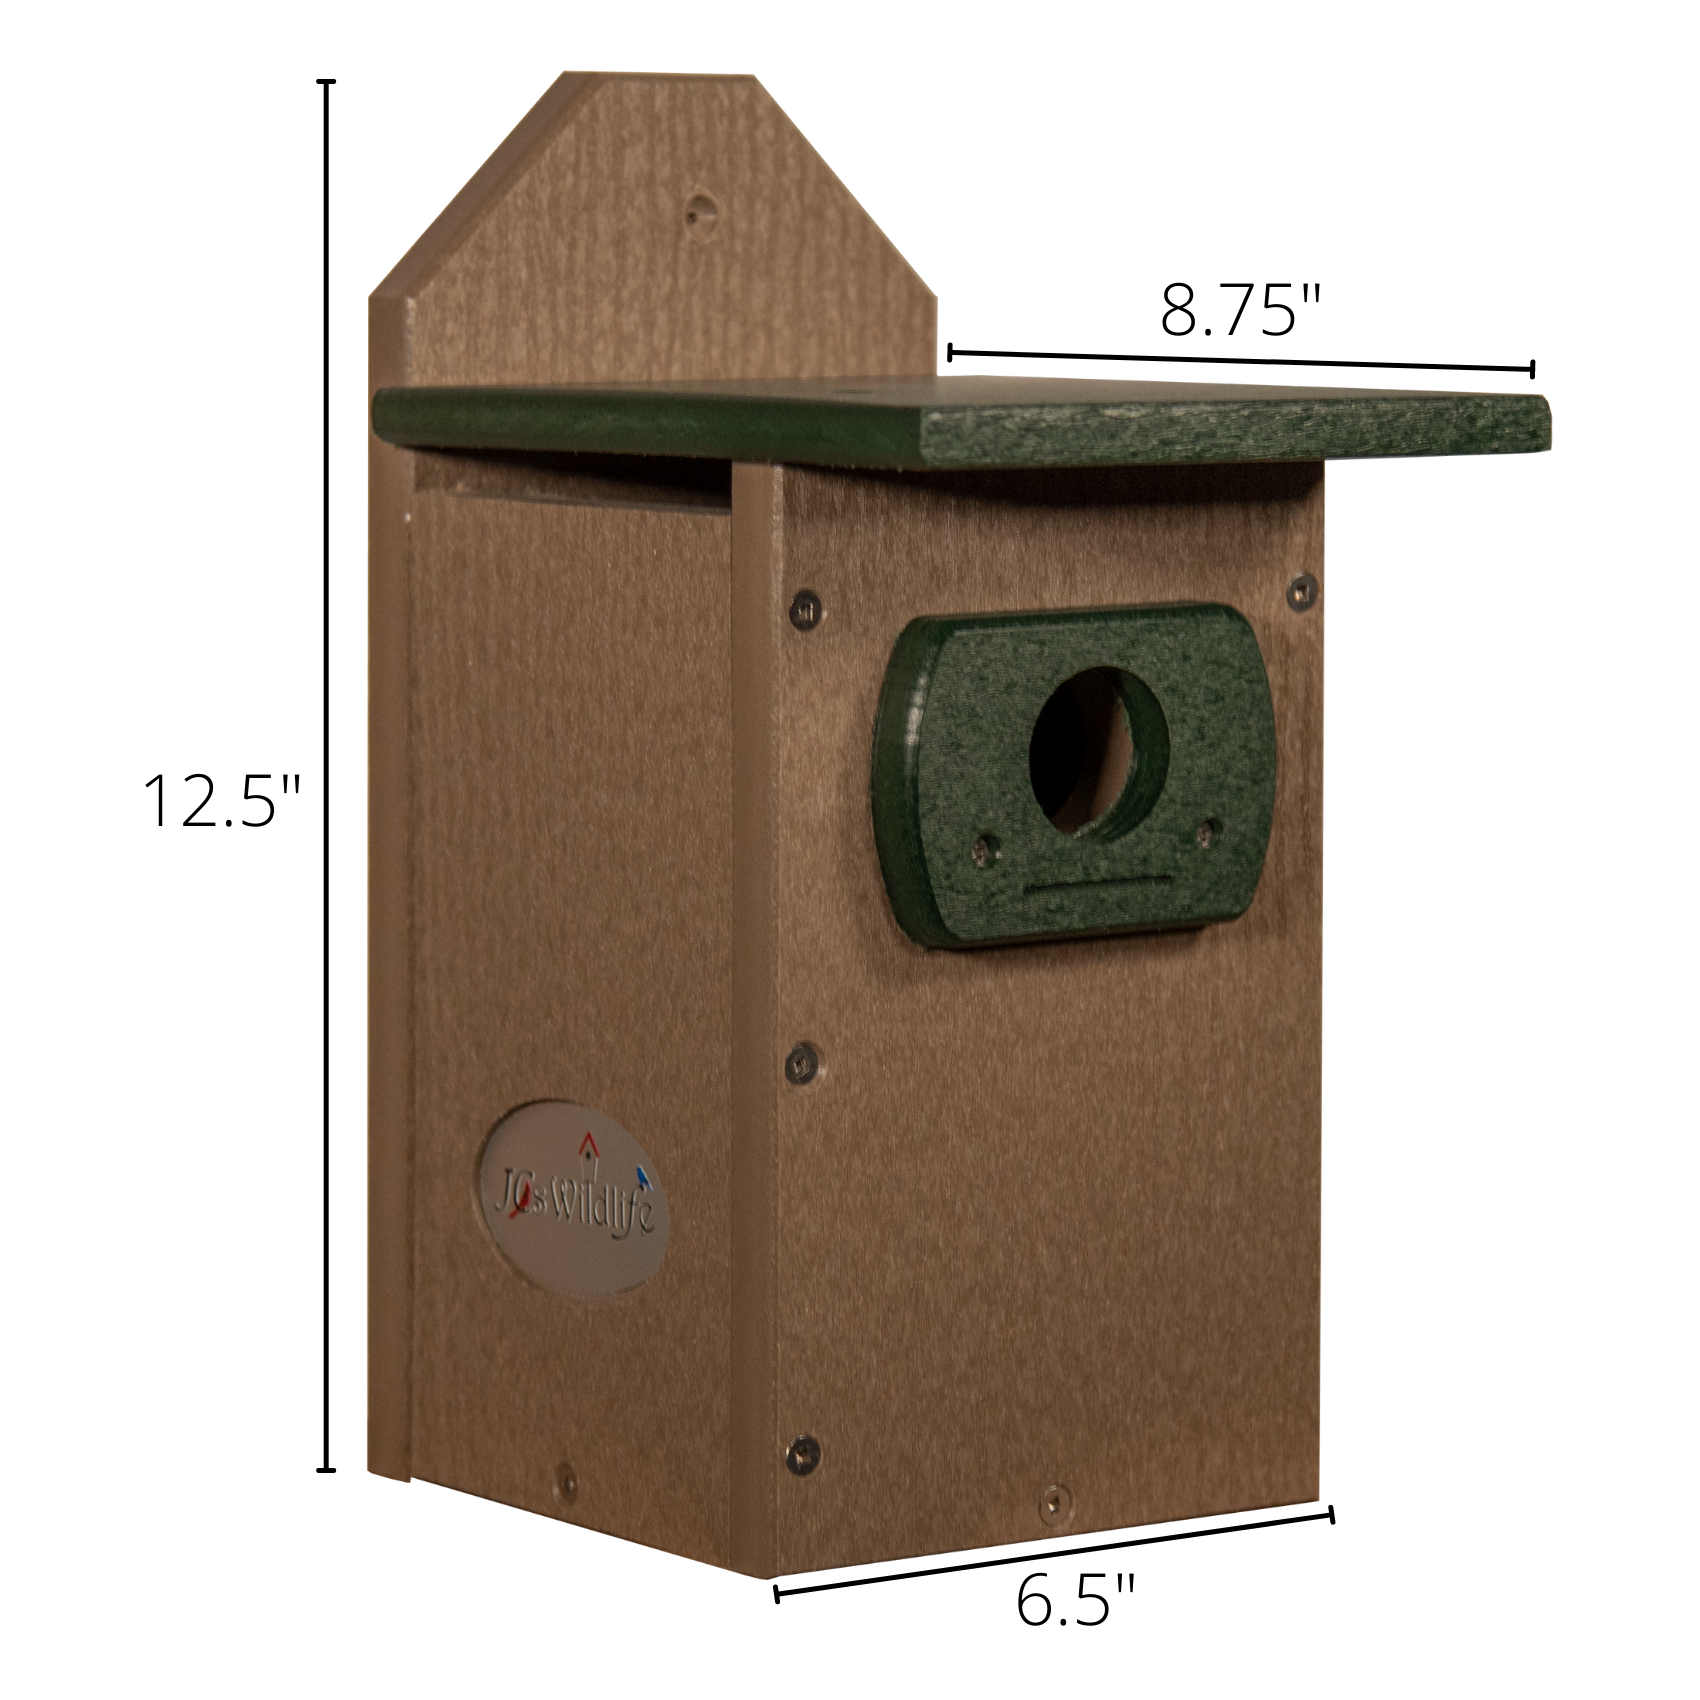 JCs Wildlife Brown Recycled Ultimate Bluebird House w/Brown Roof & Free Shipping 